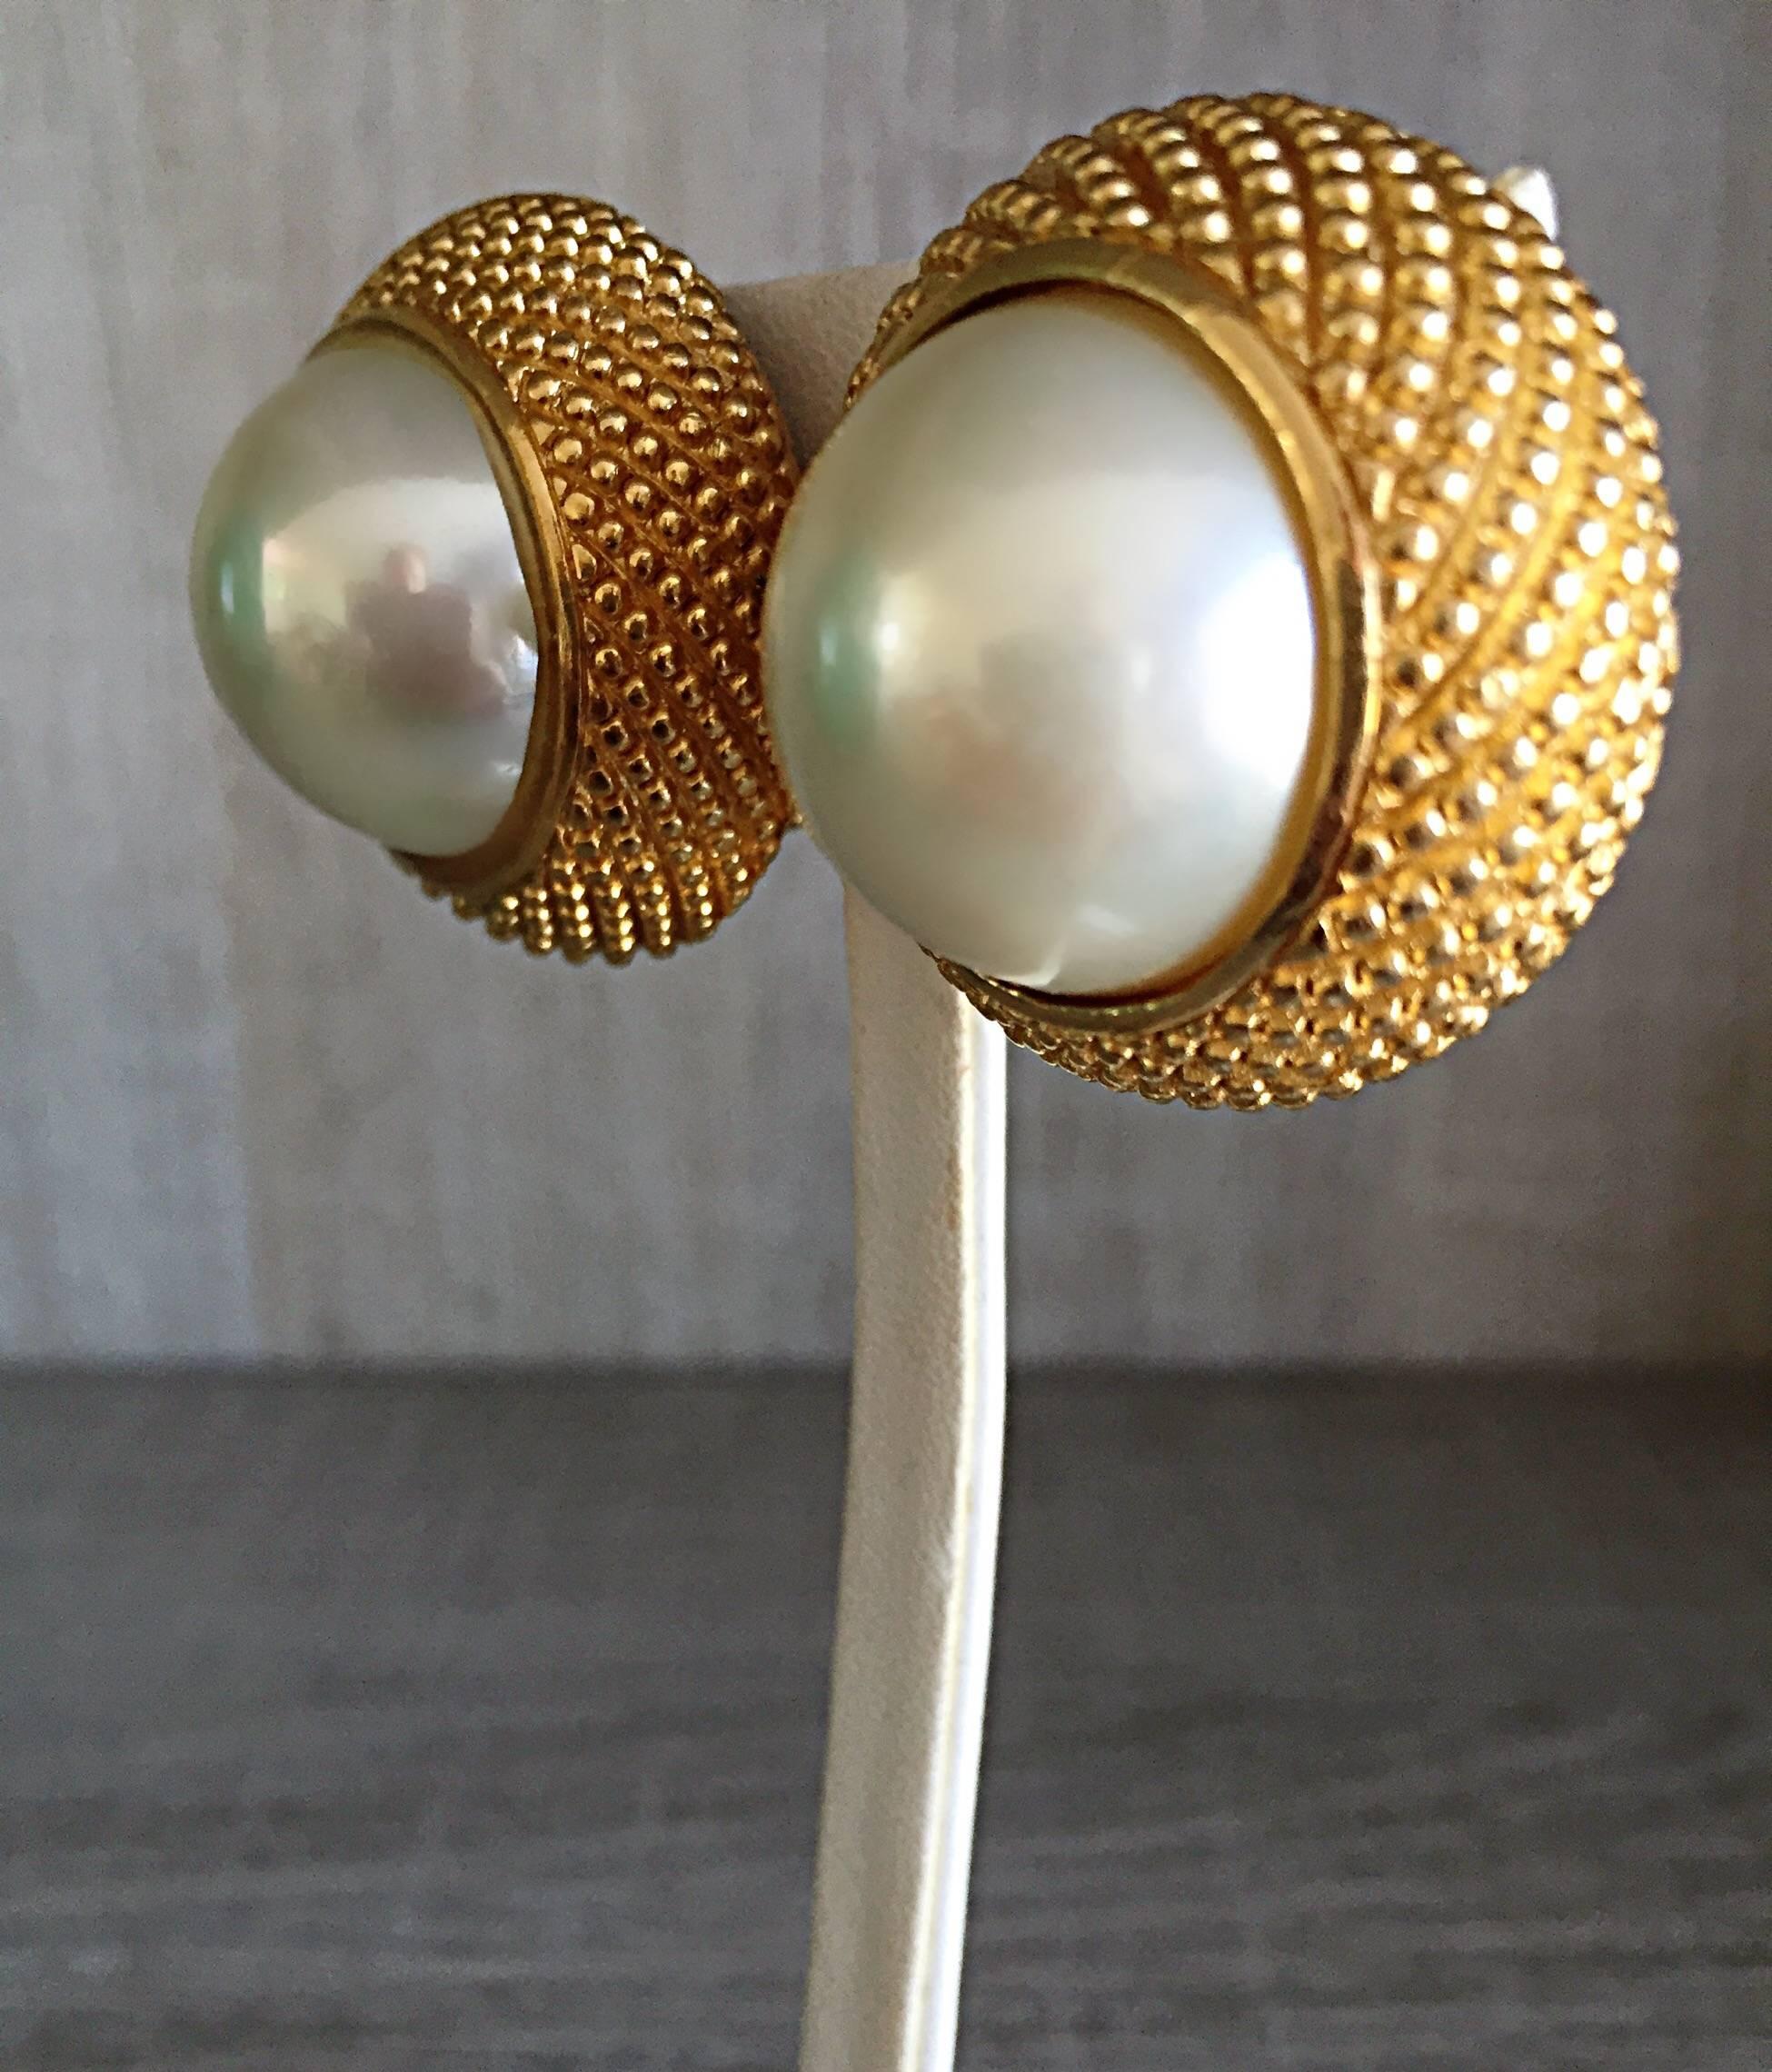 Incredible classic vintage 1990s CHRISTIAN DIOR oversized jumbo domed pearl and gold etched clip on earrings! The perfect match to a suit, jeans, or a dress. Can easily be dressed up or down. Would look fantastic with a Chanel suit! In great